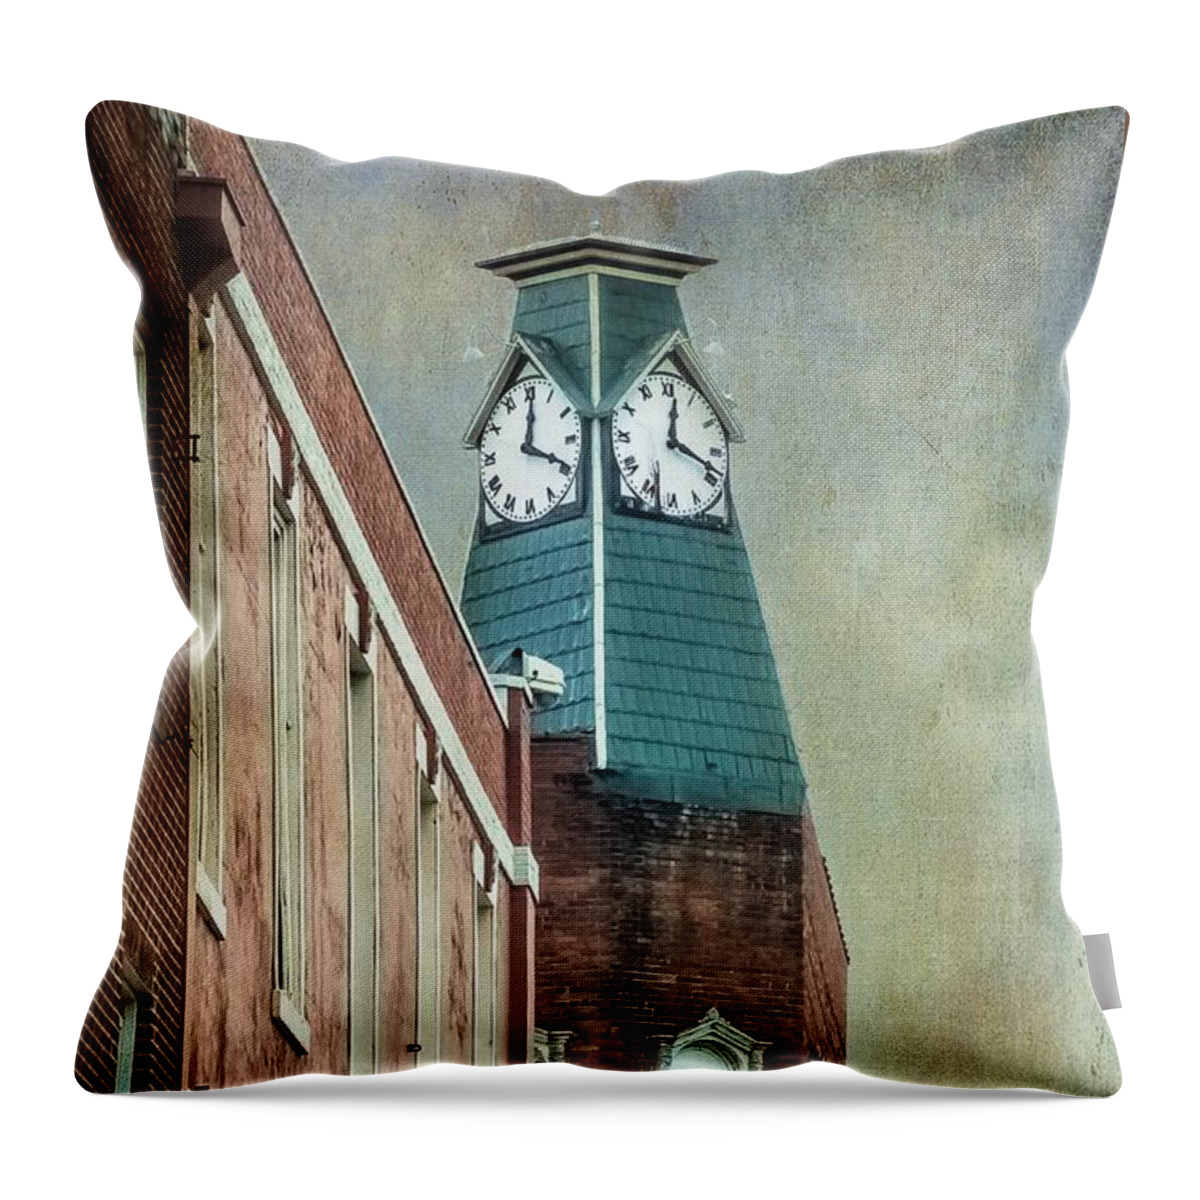 Clock Throw Pillow featuring the photograph Clock Tower Downtown Statesville North Carolina by Melissa Bittinger